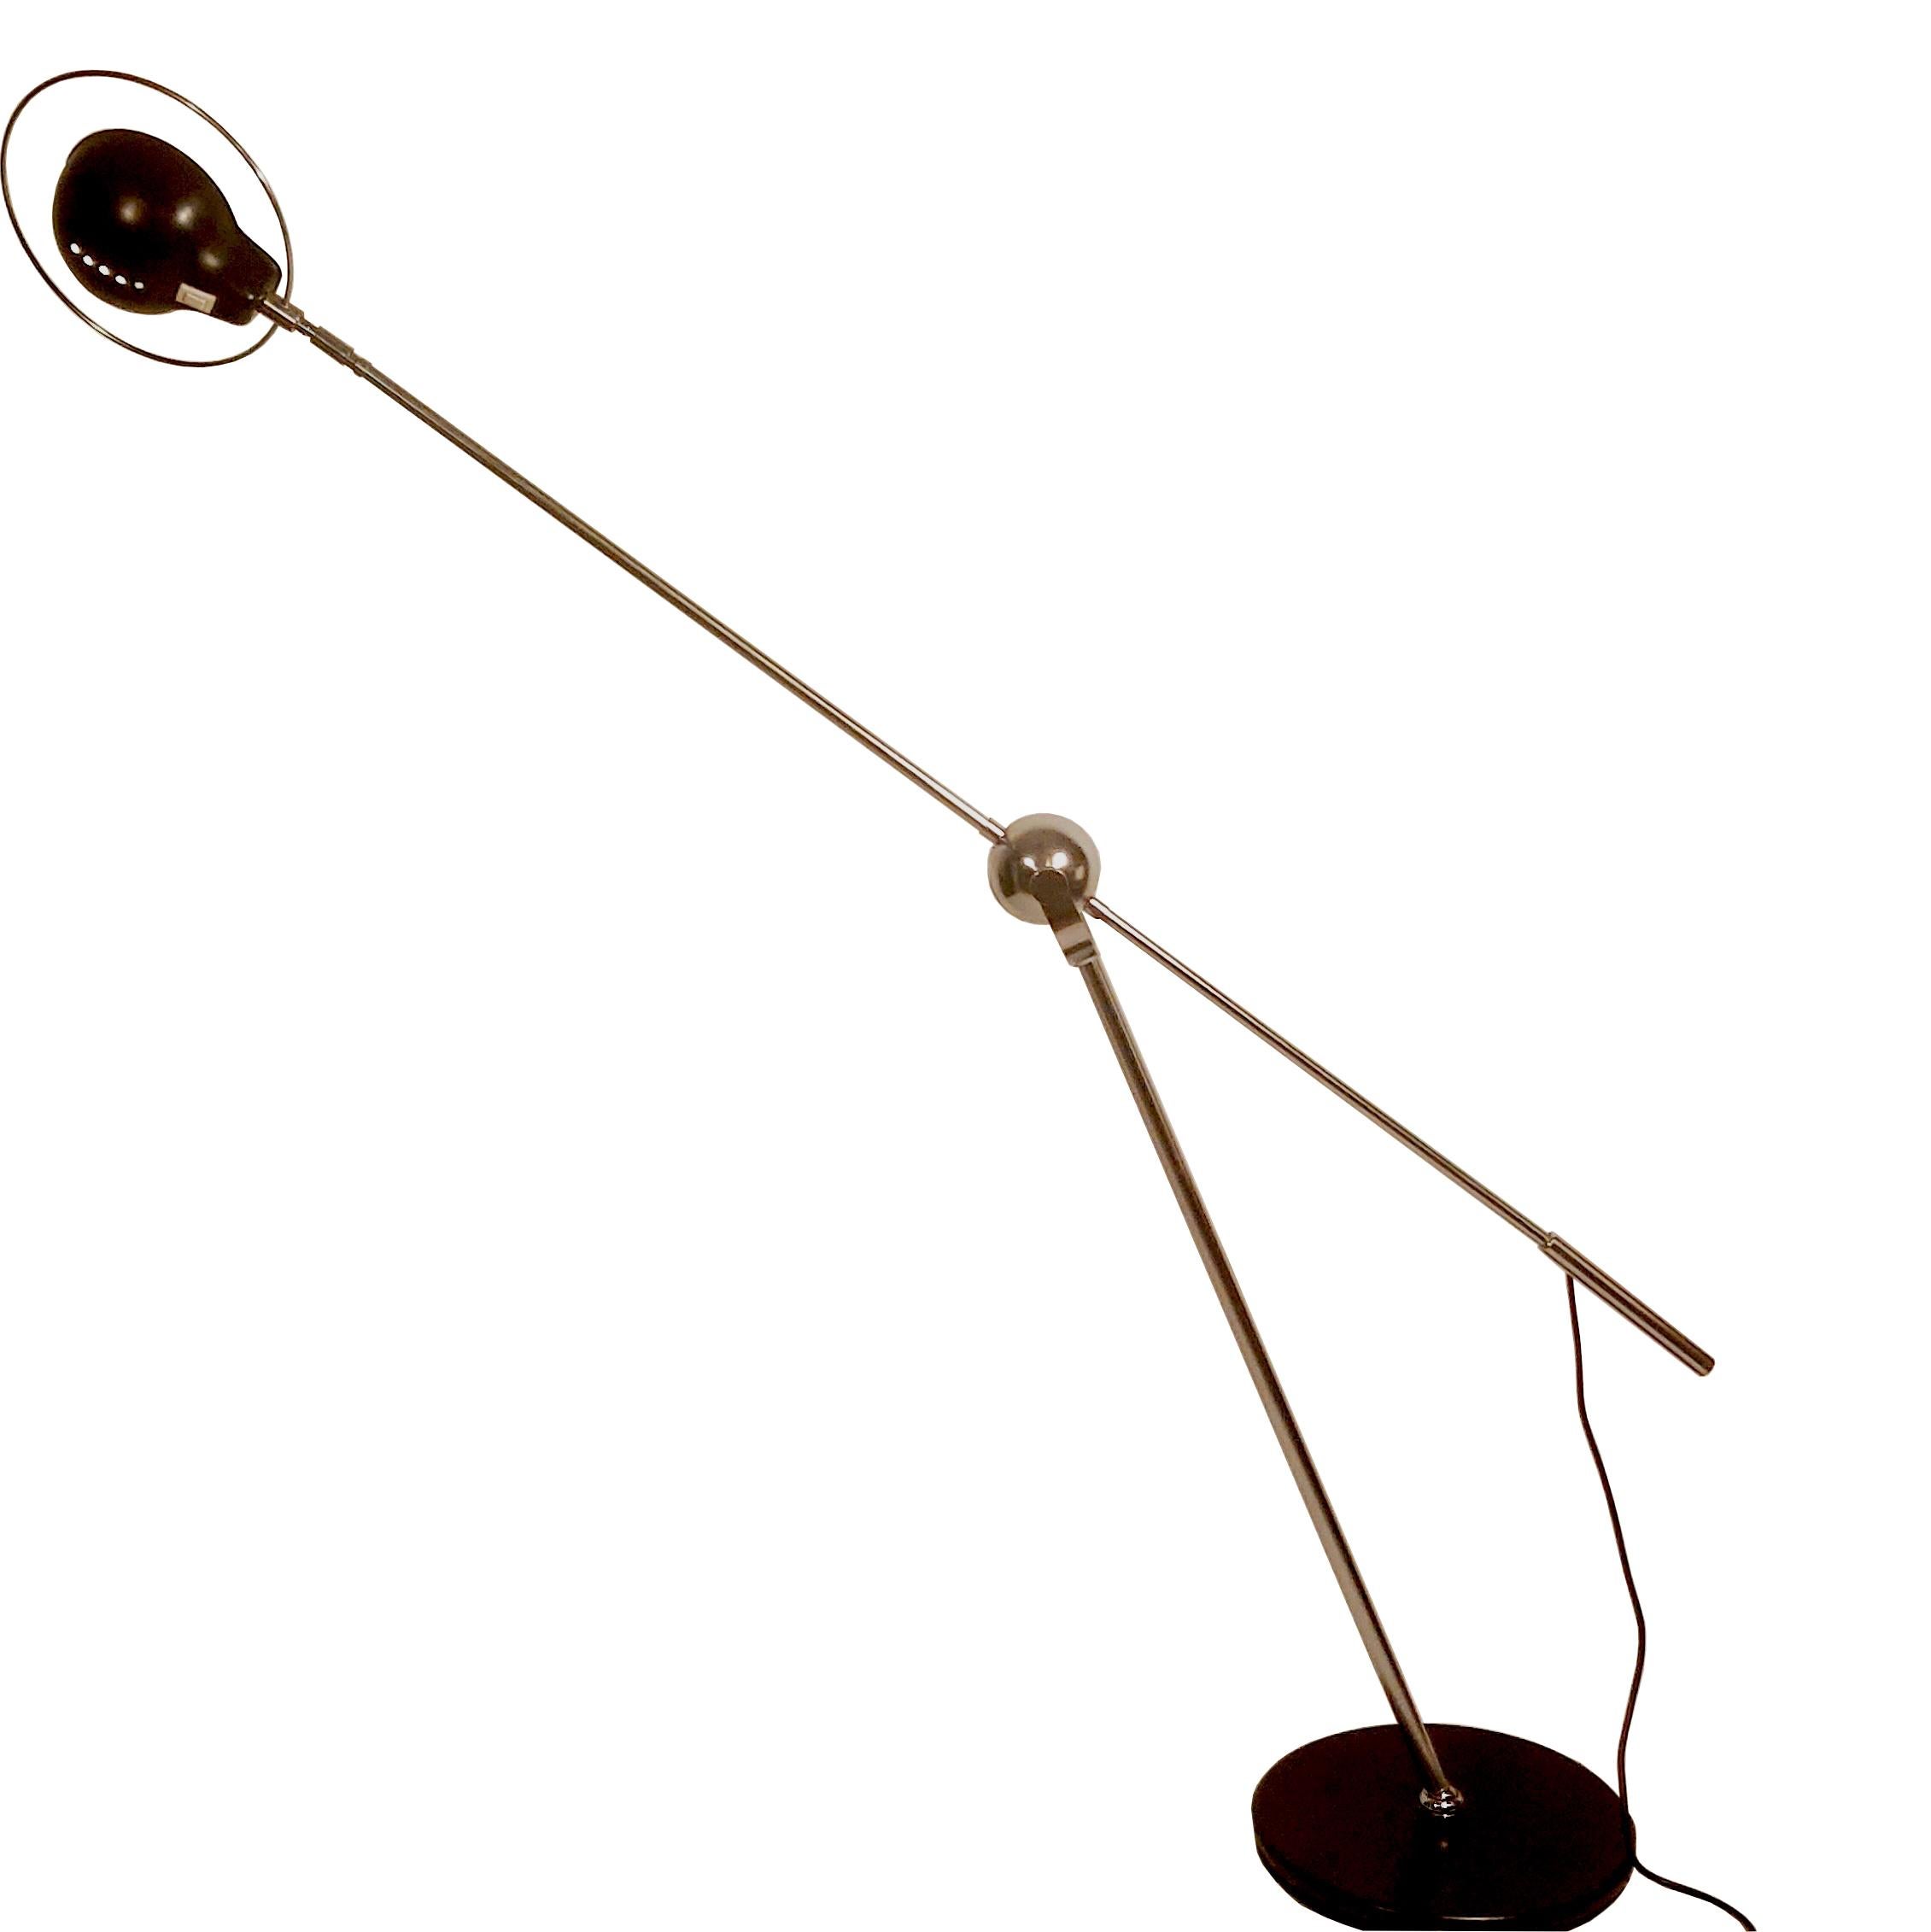 Very unique counter balance floor lamp, 1960s. The balance arm has a chrome globe joint and is adjustable up and down and can rotate, the standing shaft has a ball joint at the ground base plate and is adjustable, the shade is adjustable and can